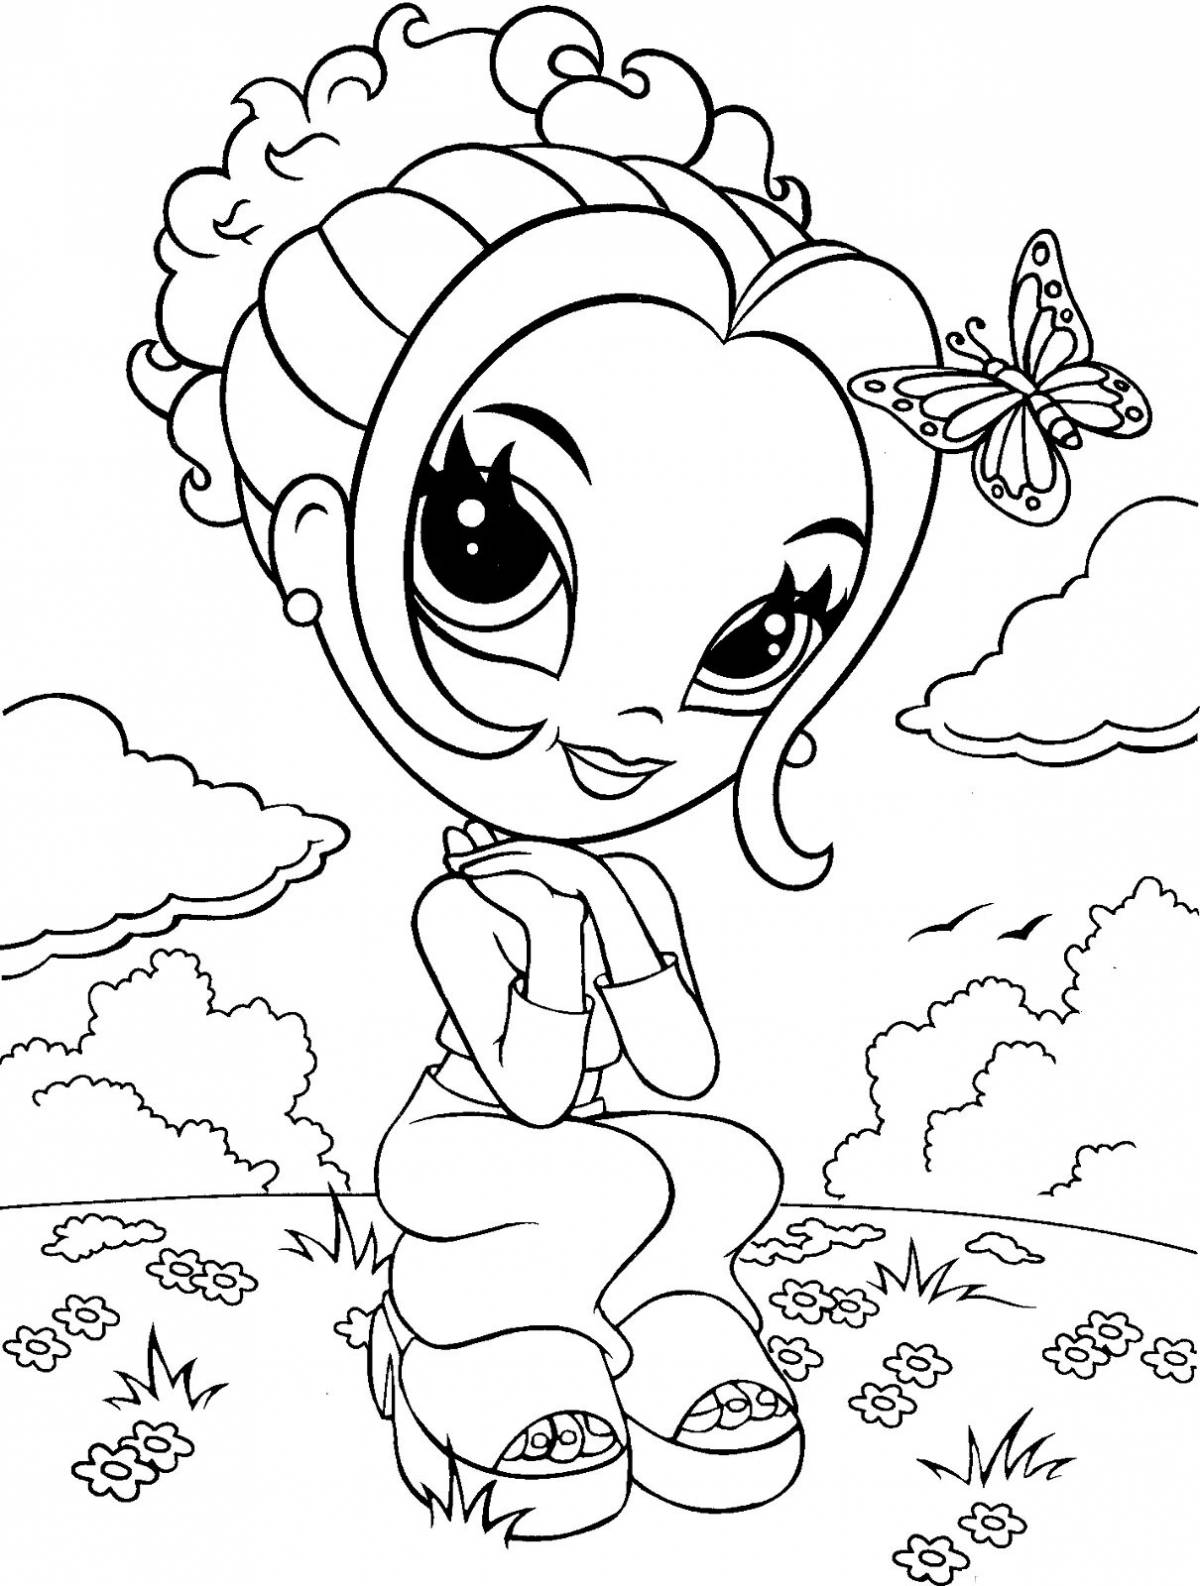 Coloring book colorful-illustrations